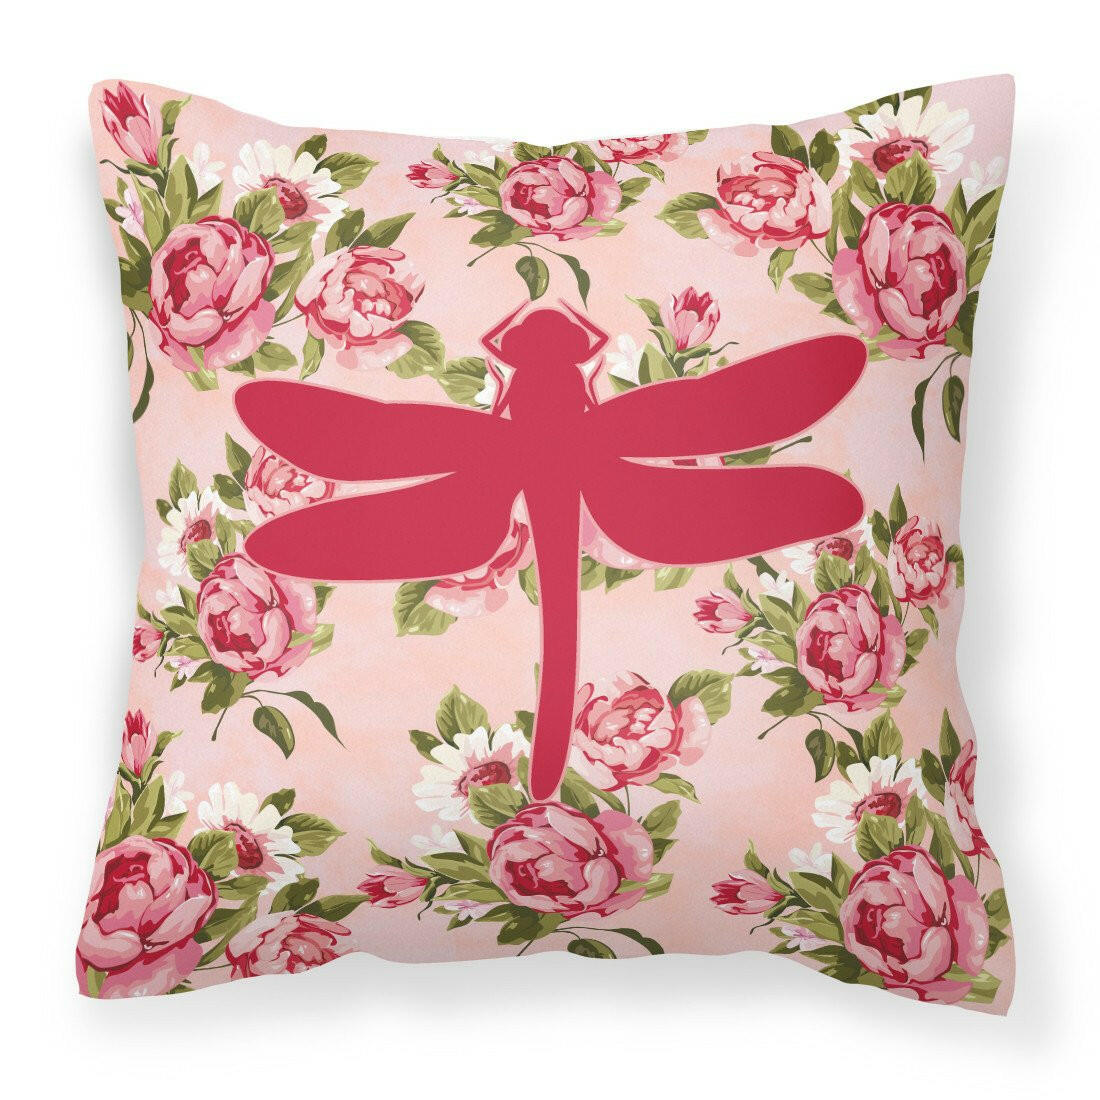 Dragonfly Shabby Chic Pink Roses  Fabric Decorative Pillow BB1062-RS-PK-PW1414 - the-store.com